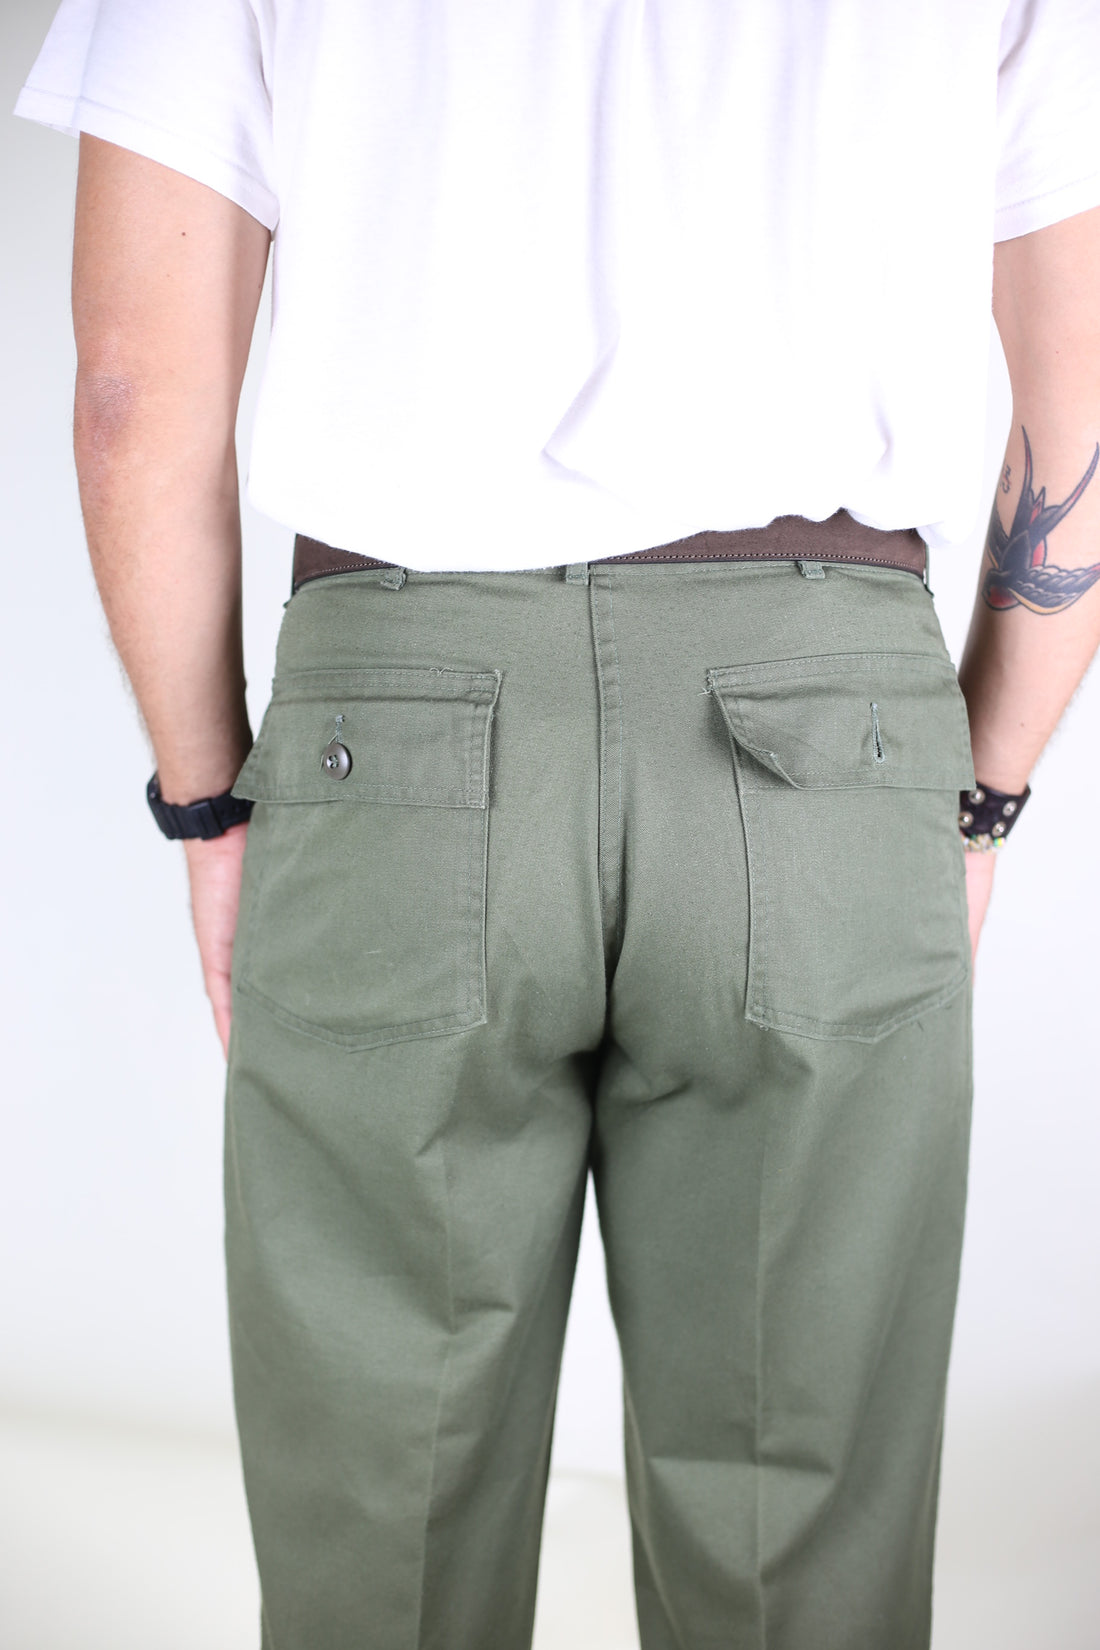 US ARMY UTILITY TROUSERS OG-507 W32 L29